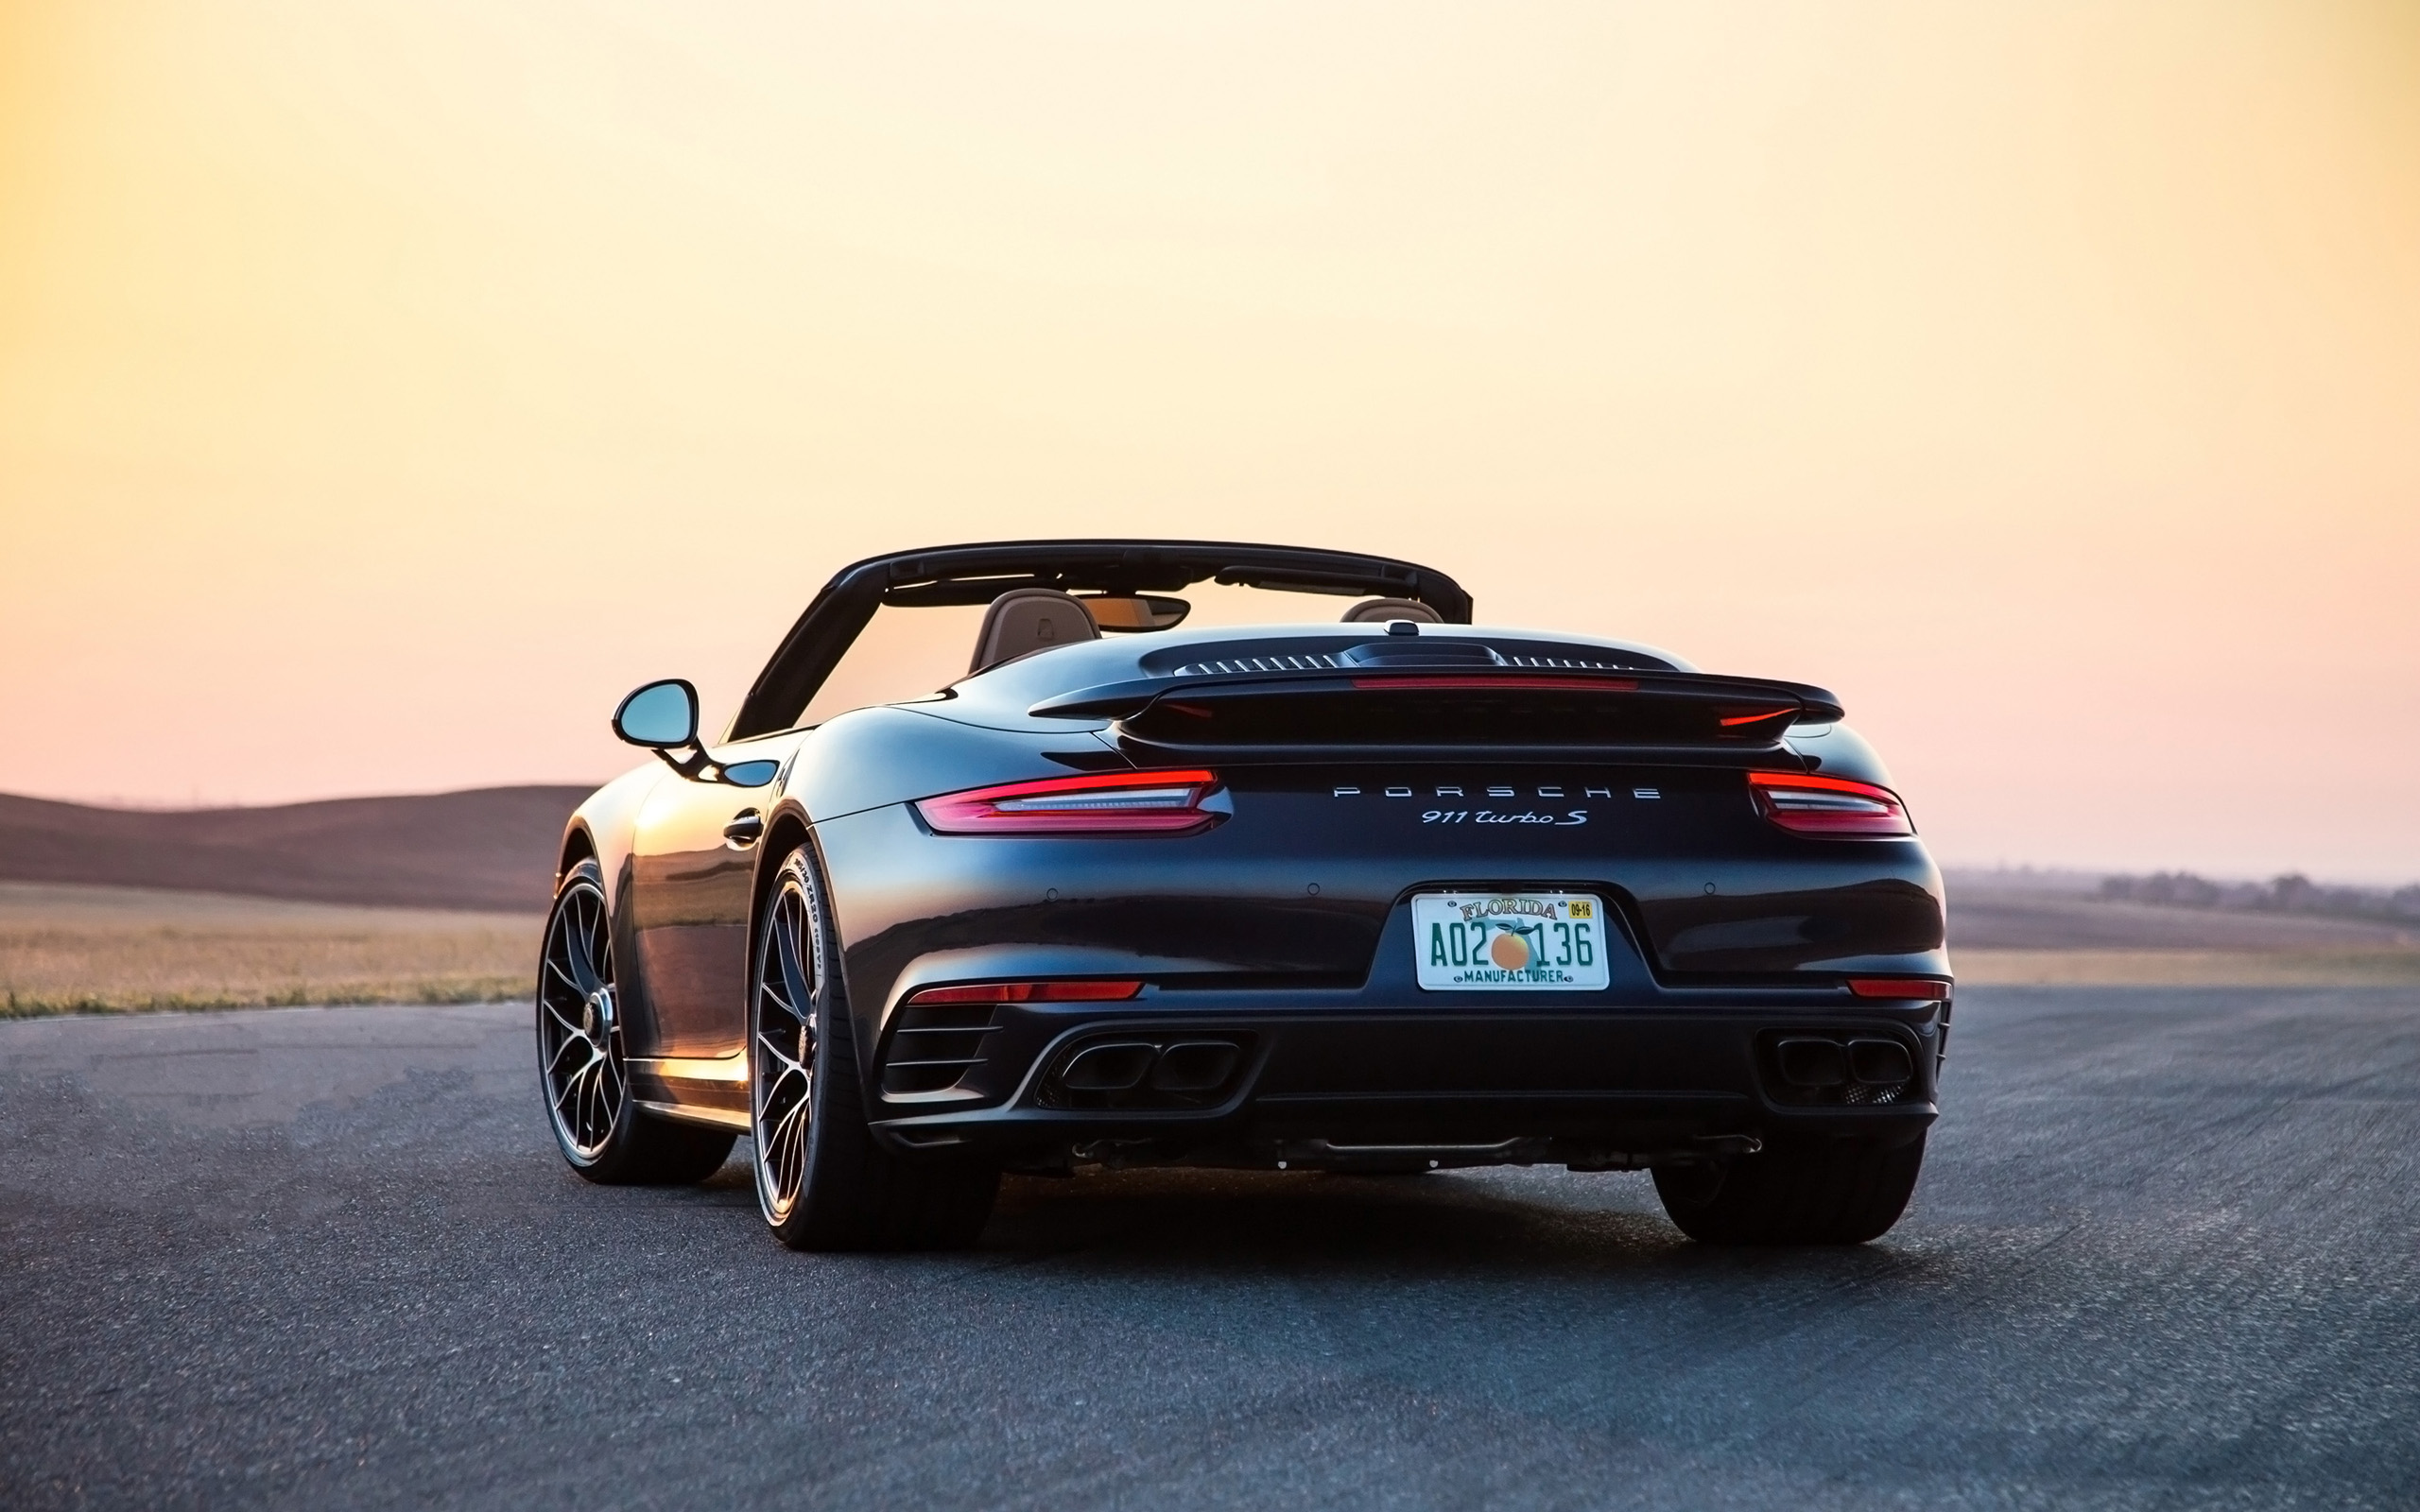 2017 Porsche 911 Turbo and 911 Turbo S   Cabriolet   Static   2